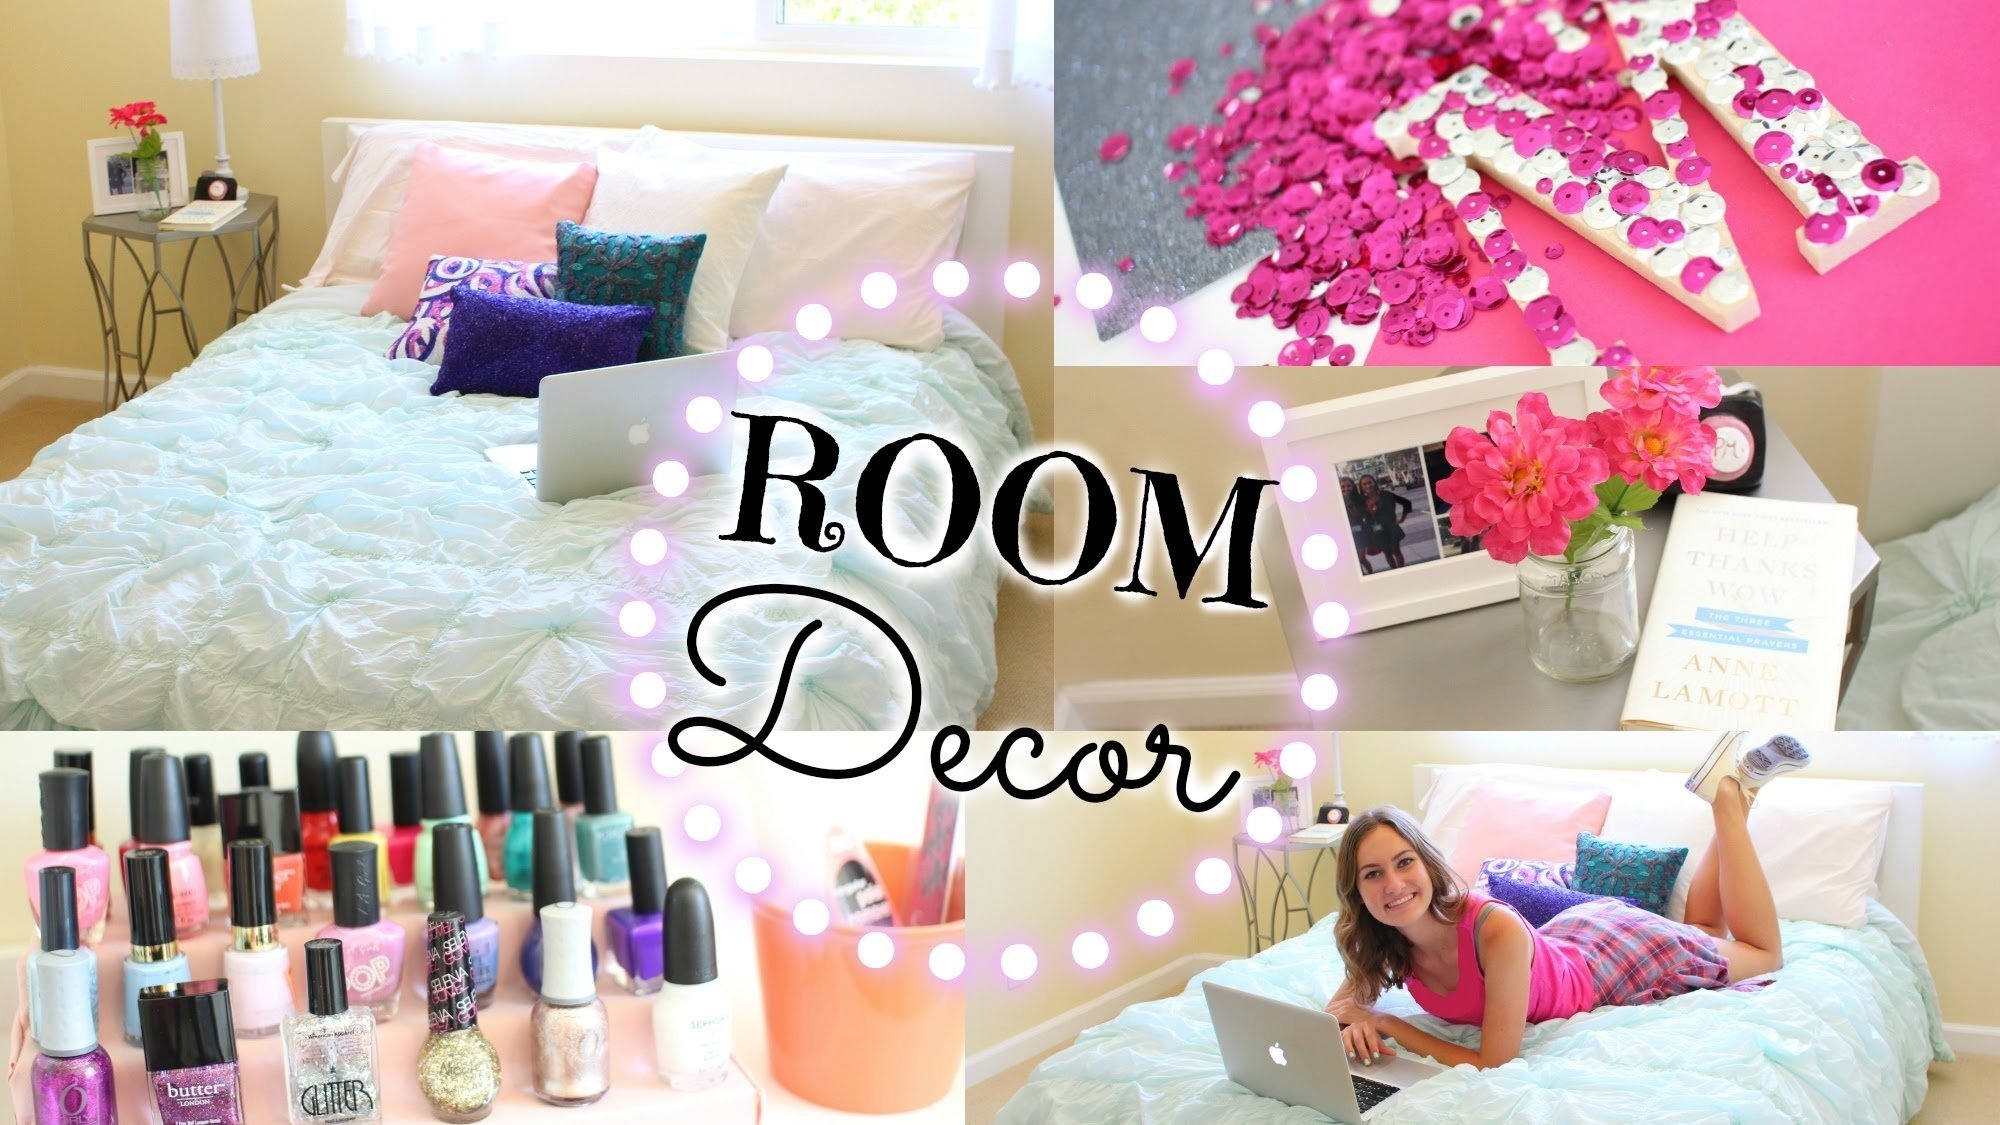 10 Fabulous Ideas To Decorate Your Room easy diy ways to re decorate your room youtube 2022